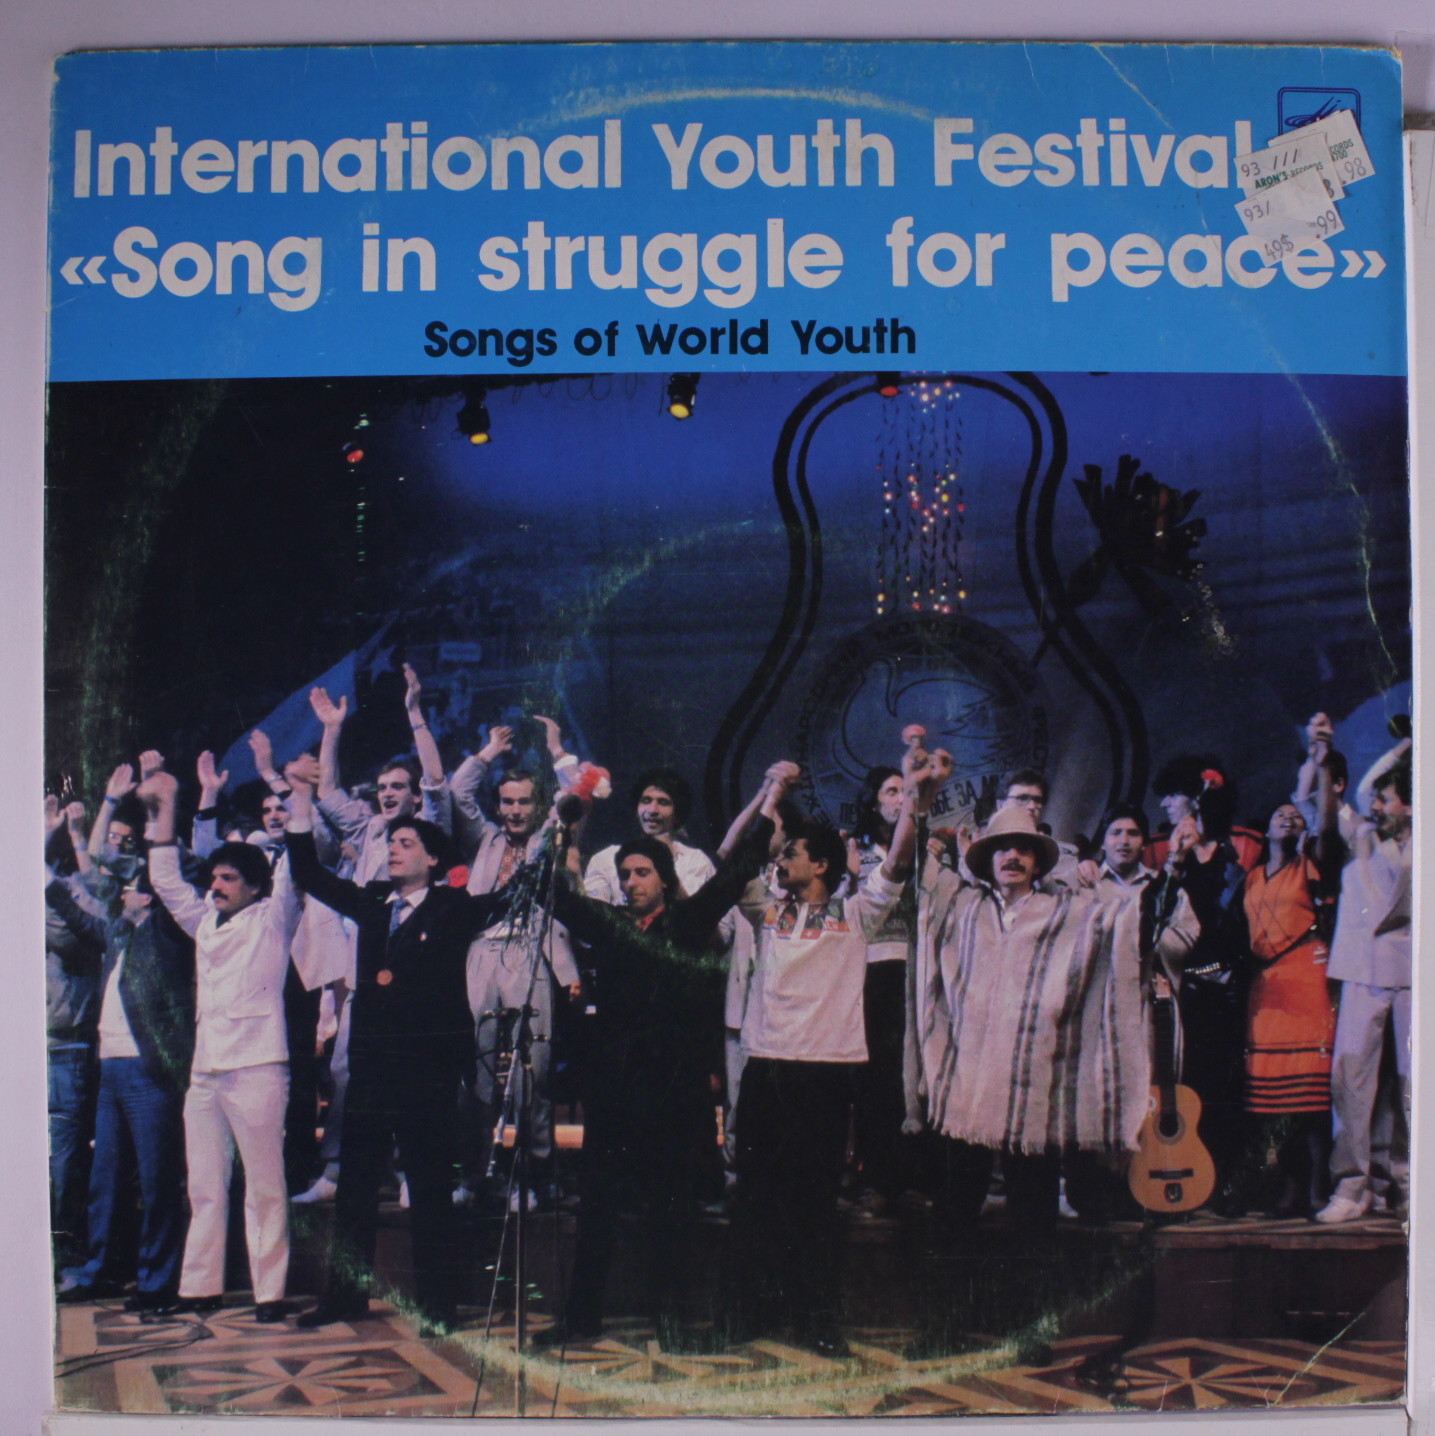 International Youth Festival "Song in Struggle For Peace"